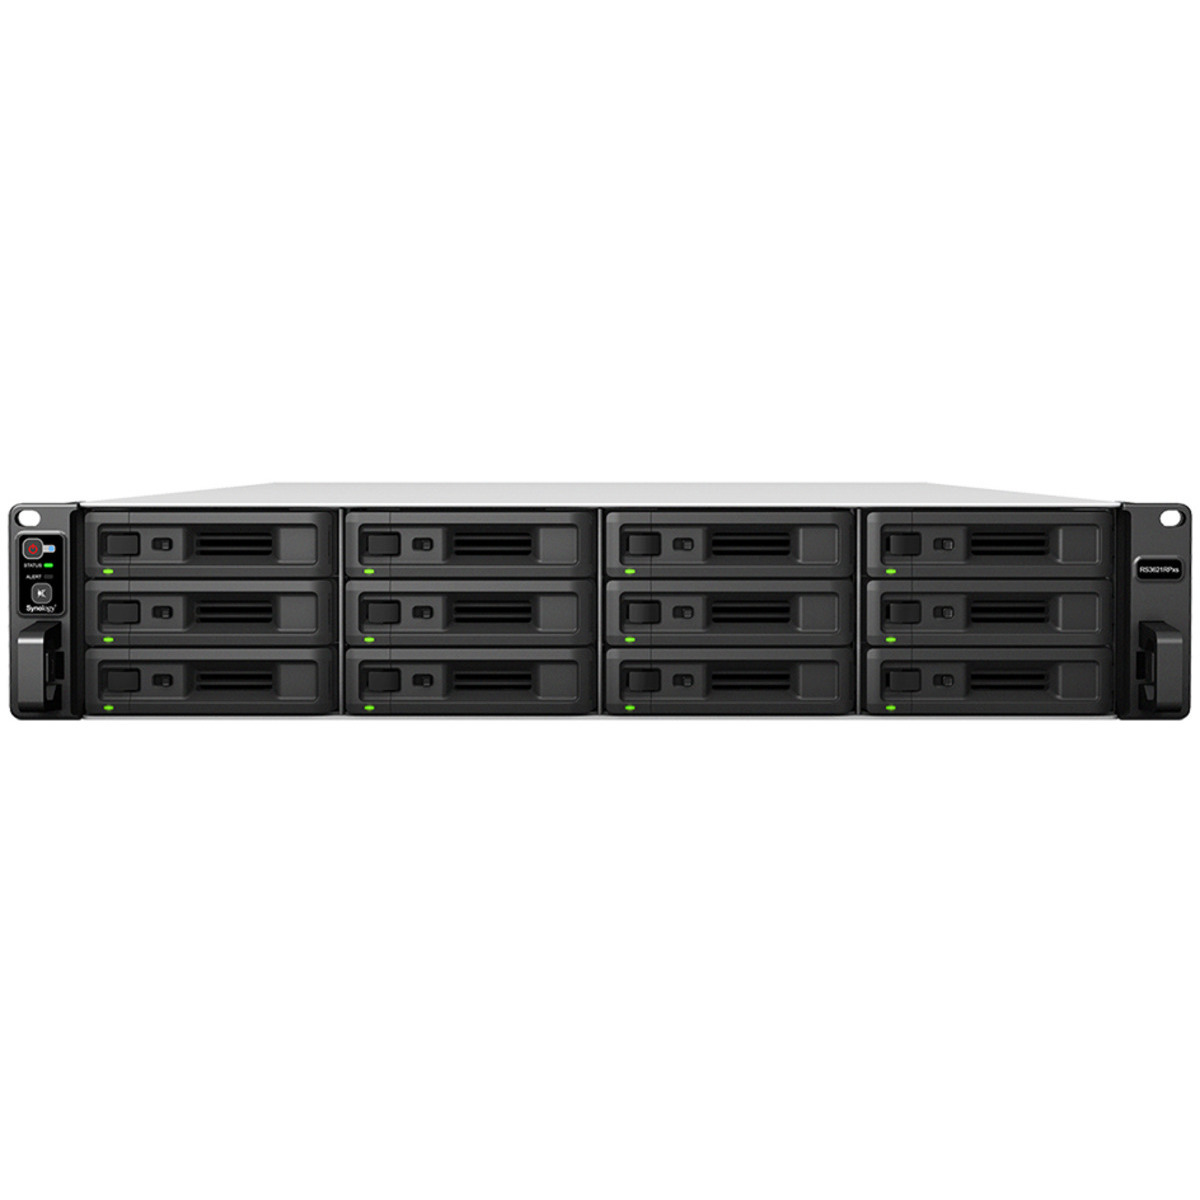 Synology RackStation RS3621RPxs 168tb 12-Bay RackMount Large Business / Enterprise NAS - Network Attached Storage Device 12x14tb Western Digital Gold WD142KRYZ 3.5 7200rpm SATA 6Gb/s HDD ENTERPRISE Class Drives Installed - Burn-In Tested RackStation RS3621RPxs